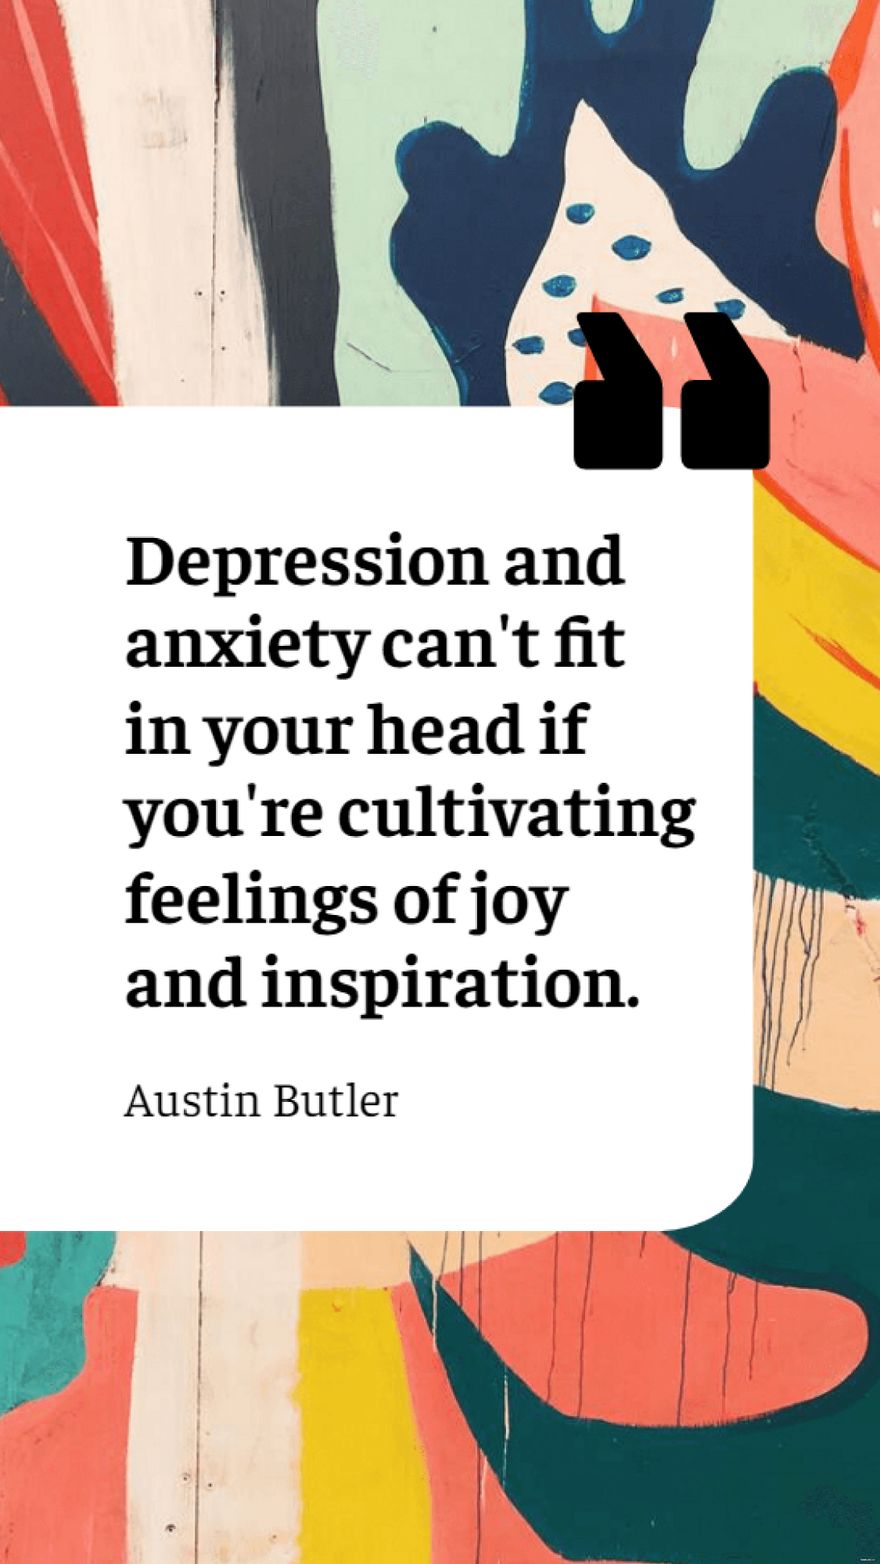 Austin Butler - Depression and anxiety can't fit in your head if you're cultivating feelings of joy and inspiration.